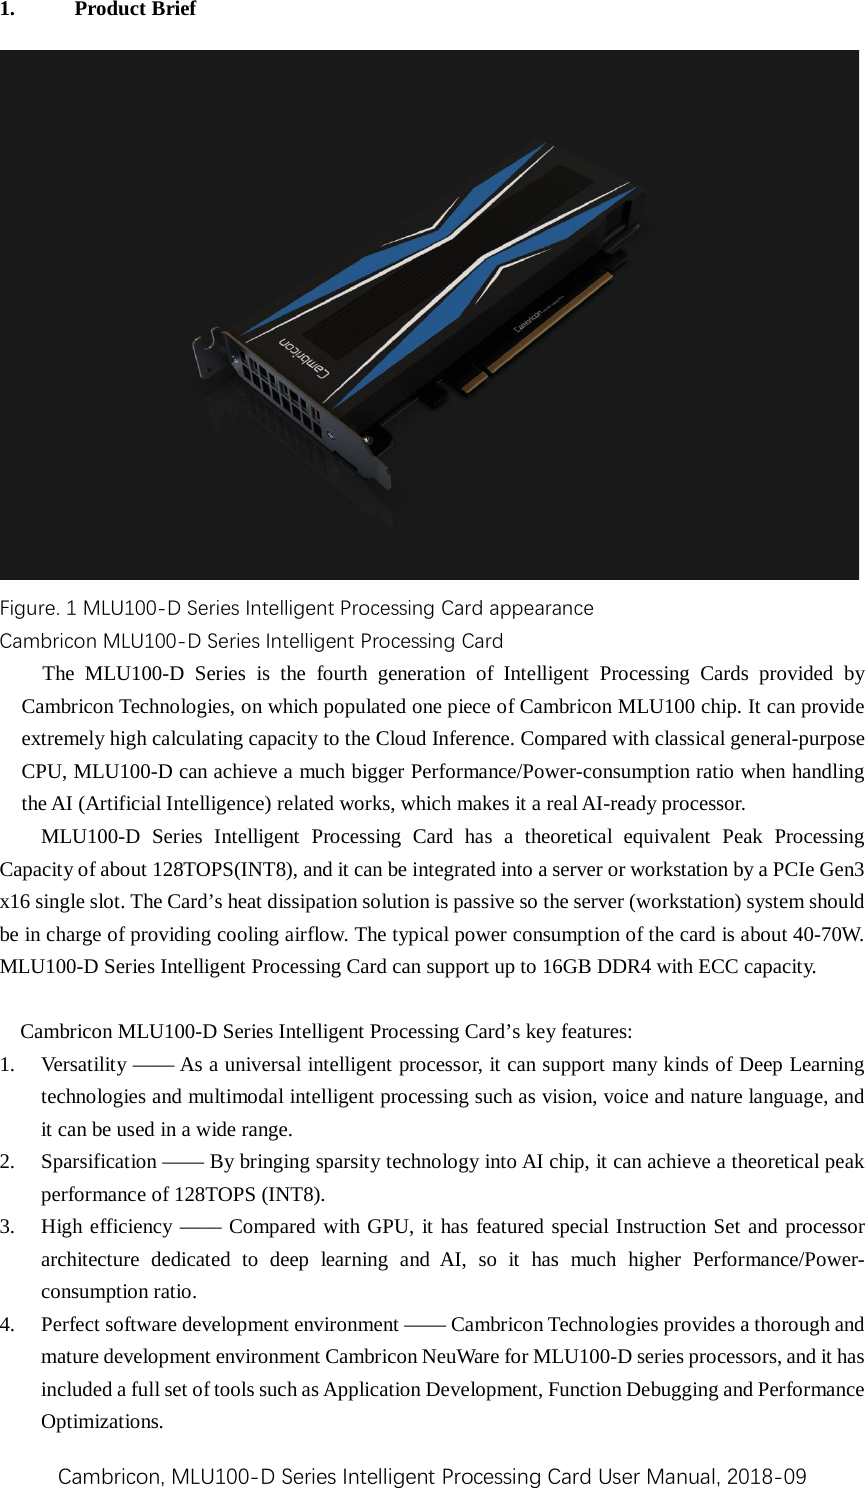 Cambricon, MLU100-D Series Intelligent Processing Card User Manual, 2018-09 1. Product Brief Figure. 1 MLU100-D Series Intelligent Processing Card appearance Cambricon MLU100-D Series Intelligent Processing Card The  MLU100-D  Series is the fourth generation of Intelligent Processing Cards  provided by Cambricon Technologies, on which populated one piece of Cambricon MLU100 chip. It can provide extremely high calculating capacity to the Cloud Inference. Compared with classical general-purpose CPU, MLU100-D can achieve a much bigger Performance/Power-consumption ratio when handling the AI (Artificial Intelligence) related works, which makes it a real AI-ready processor. MLU100-D  Series Intelligent Processing Card has a theoretical  equivalent  Peak Processing Capacity of about 128TOPS(INT8), and it can be integrated into a server or workstation by a PCIe Gen3 x16 single slot. The Card’s heat dissipation solution is passive so the server (workstation) system should be in charge of providing cooling airflow. The typical power consumption of the card is about 40-70W. MLU100-D Series Intelligent Processing Card can support up to 16GB DDR4 with ECC capacity.  Cambricon MLU100-D Series Intelligent Processing Card’s key features: 1. Versatility —— As a universal intelligent processor, it can support many kinds of Deep Learning technologies and multimodal intelligent processing such as vision, voice and nature language, and it can be used in a wide range.   2. Sparsification —— By bringing sparsity technology into AI chip, it can achieve a theoretical peak performance of 128TOPS (INT8).   3. High efficiency —— Compared with GPU, it has featured special Instruction Set and processor architecture dedicated to deep learning and AI, so it has much higher Performance/Power-consumption ratio.   4. Perfect software development environment —— Cambricon Technologies provides a thorough and mature development environment Cambricon NeuWare for MLU100-D series processors, and it has included a full set of tools such as Application Development, Function Debugging and Performance Optimizations.   